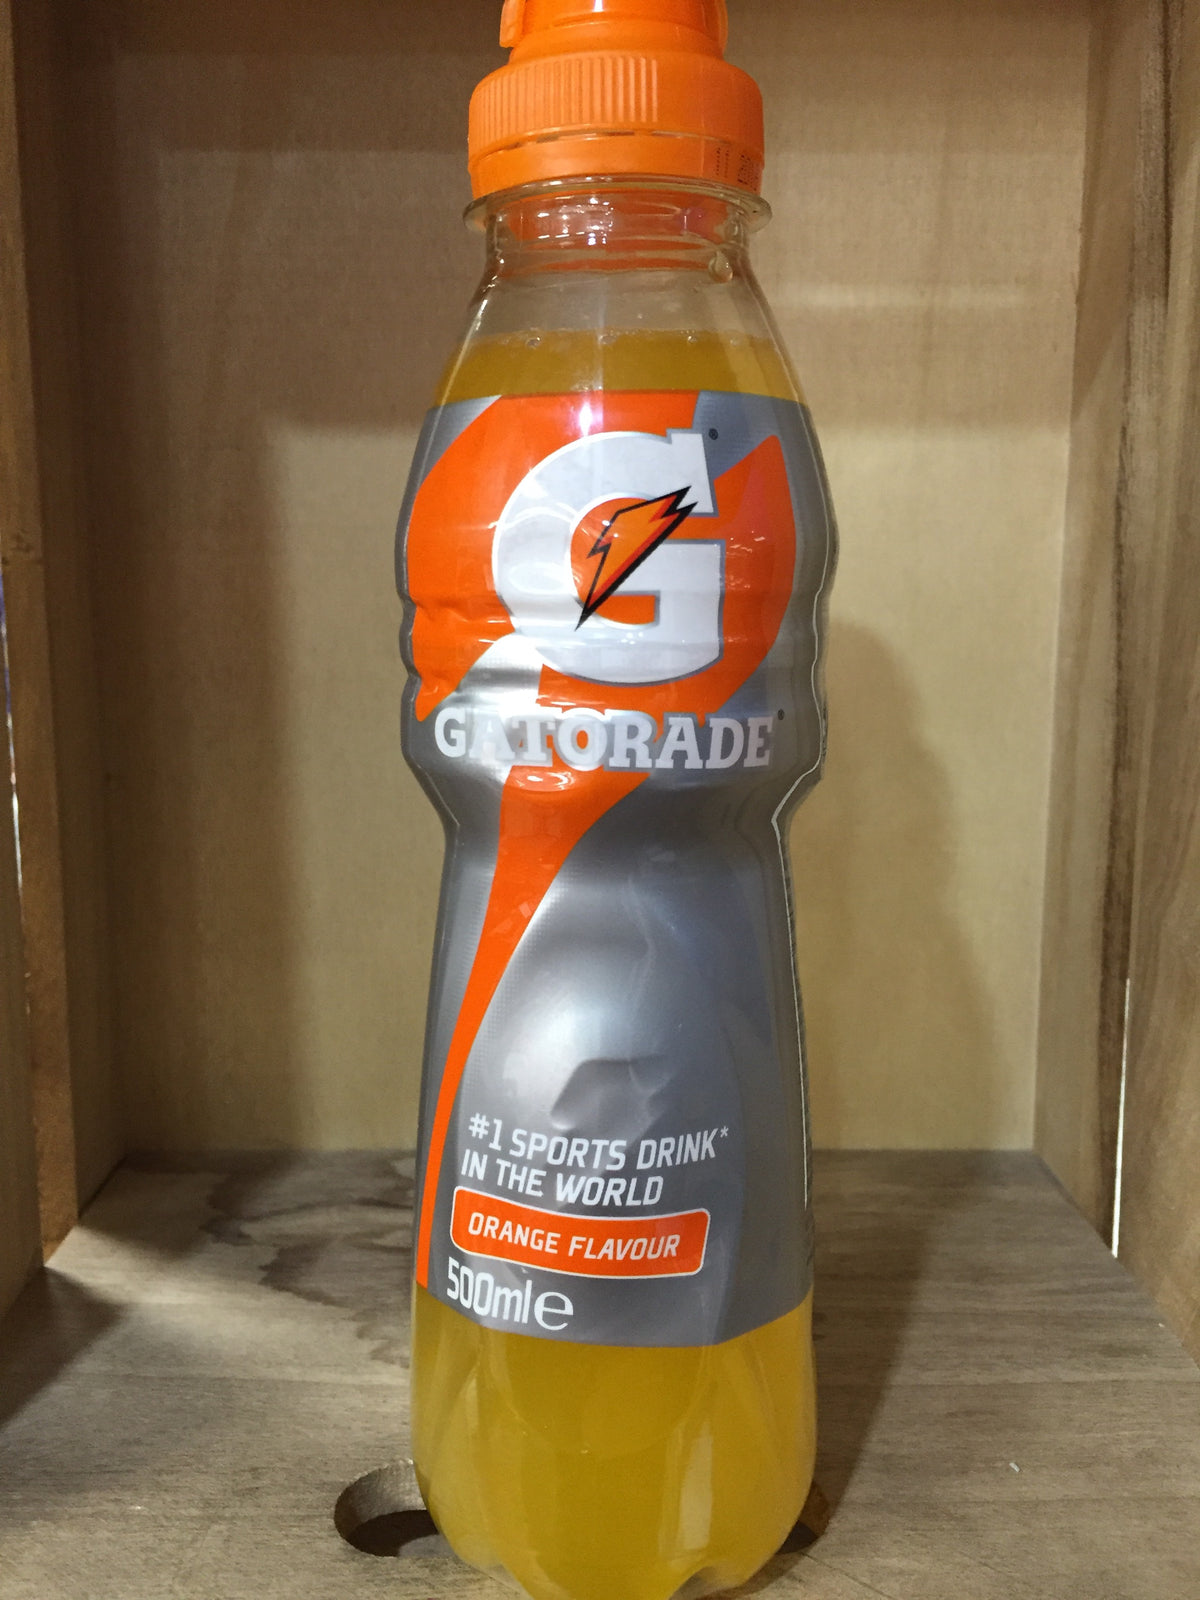 https://www.shoplowpricefoods.shop/wp-content/uploads/1692/12/we-take-pride-in-treating-each-customer-who-walks-to-our-store-like-family-helping-customers-find-24x-gatorade-orange-500ml-gatorade-is-our-goal_0.jpg